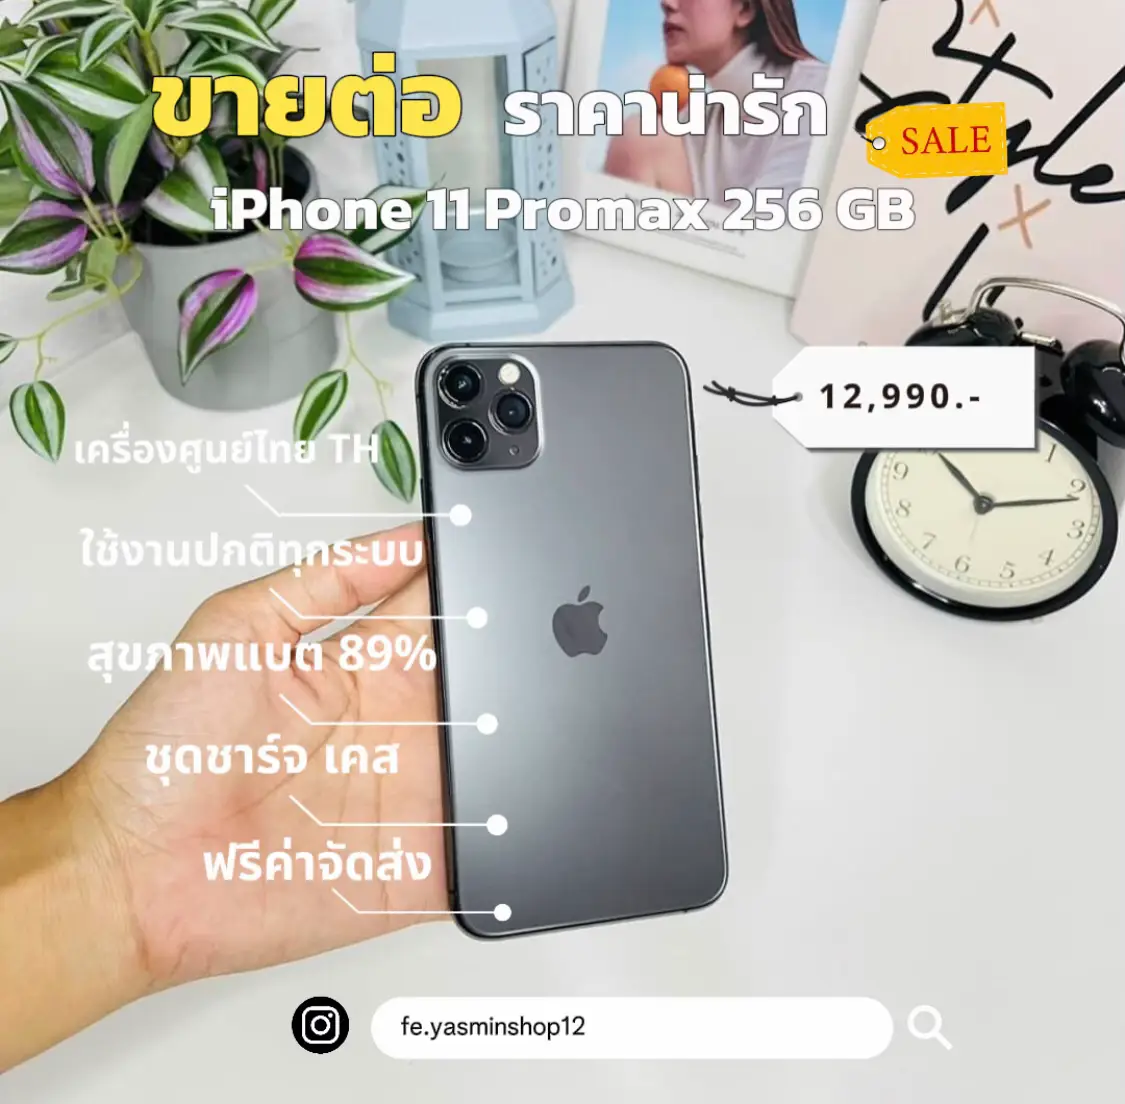 iPhone 11 Promax 256GB | Gallery posted by Ibrahim | Lemon8